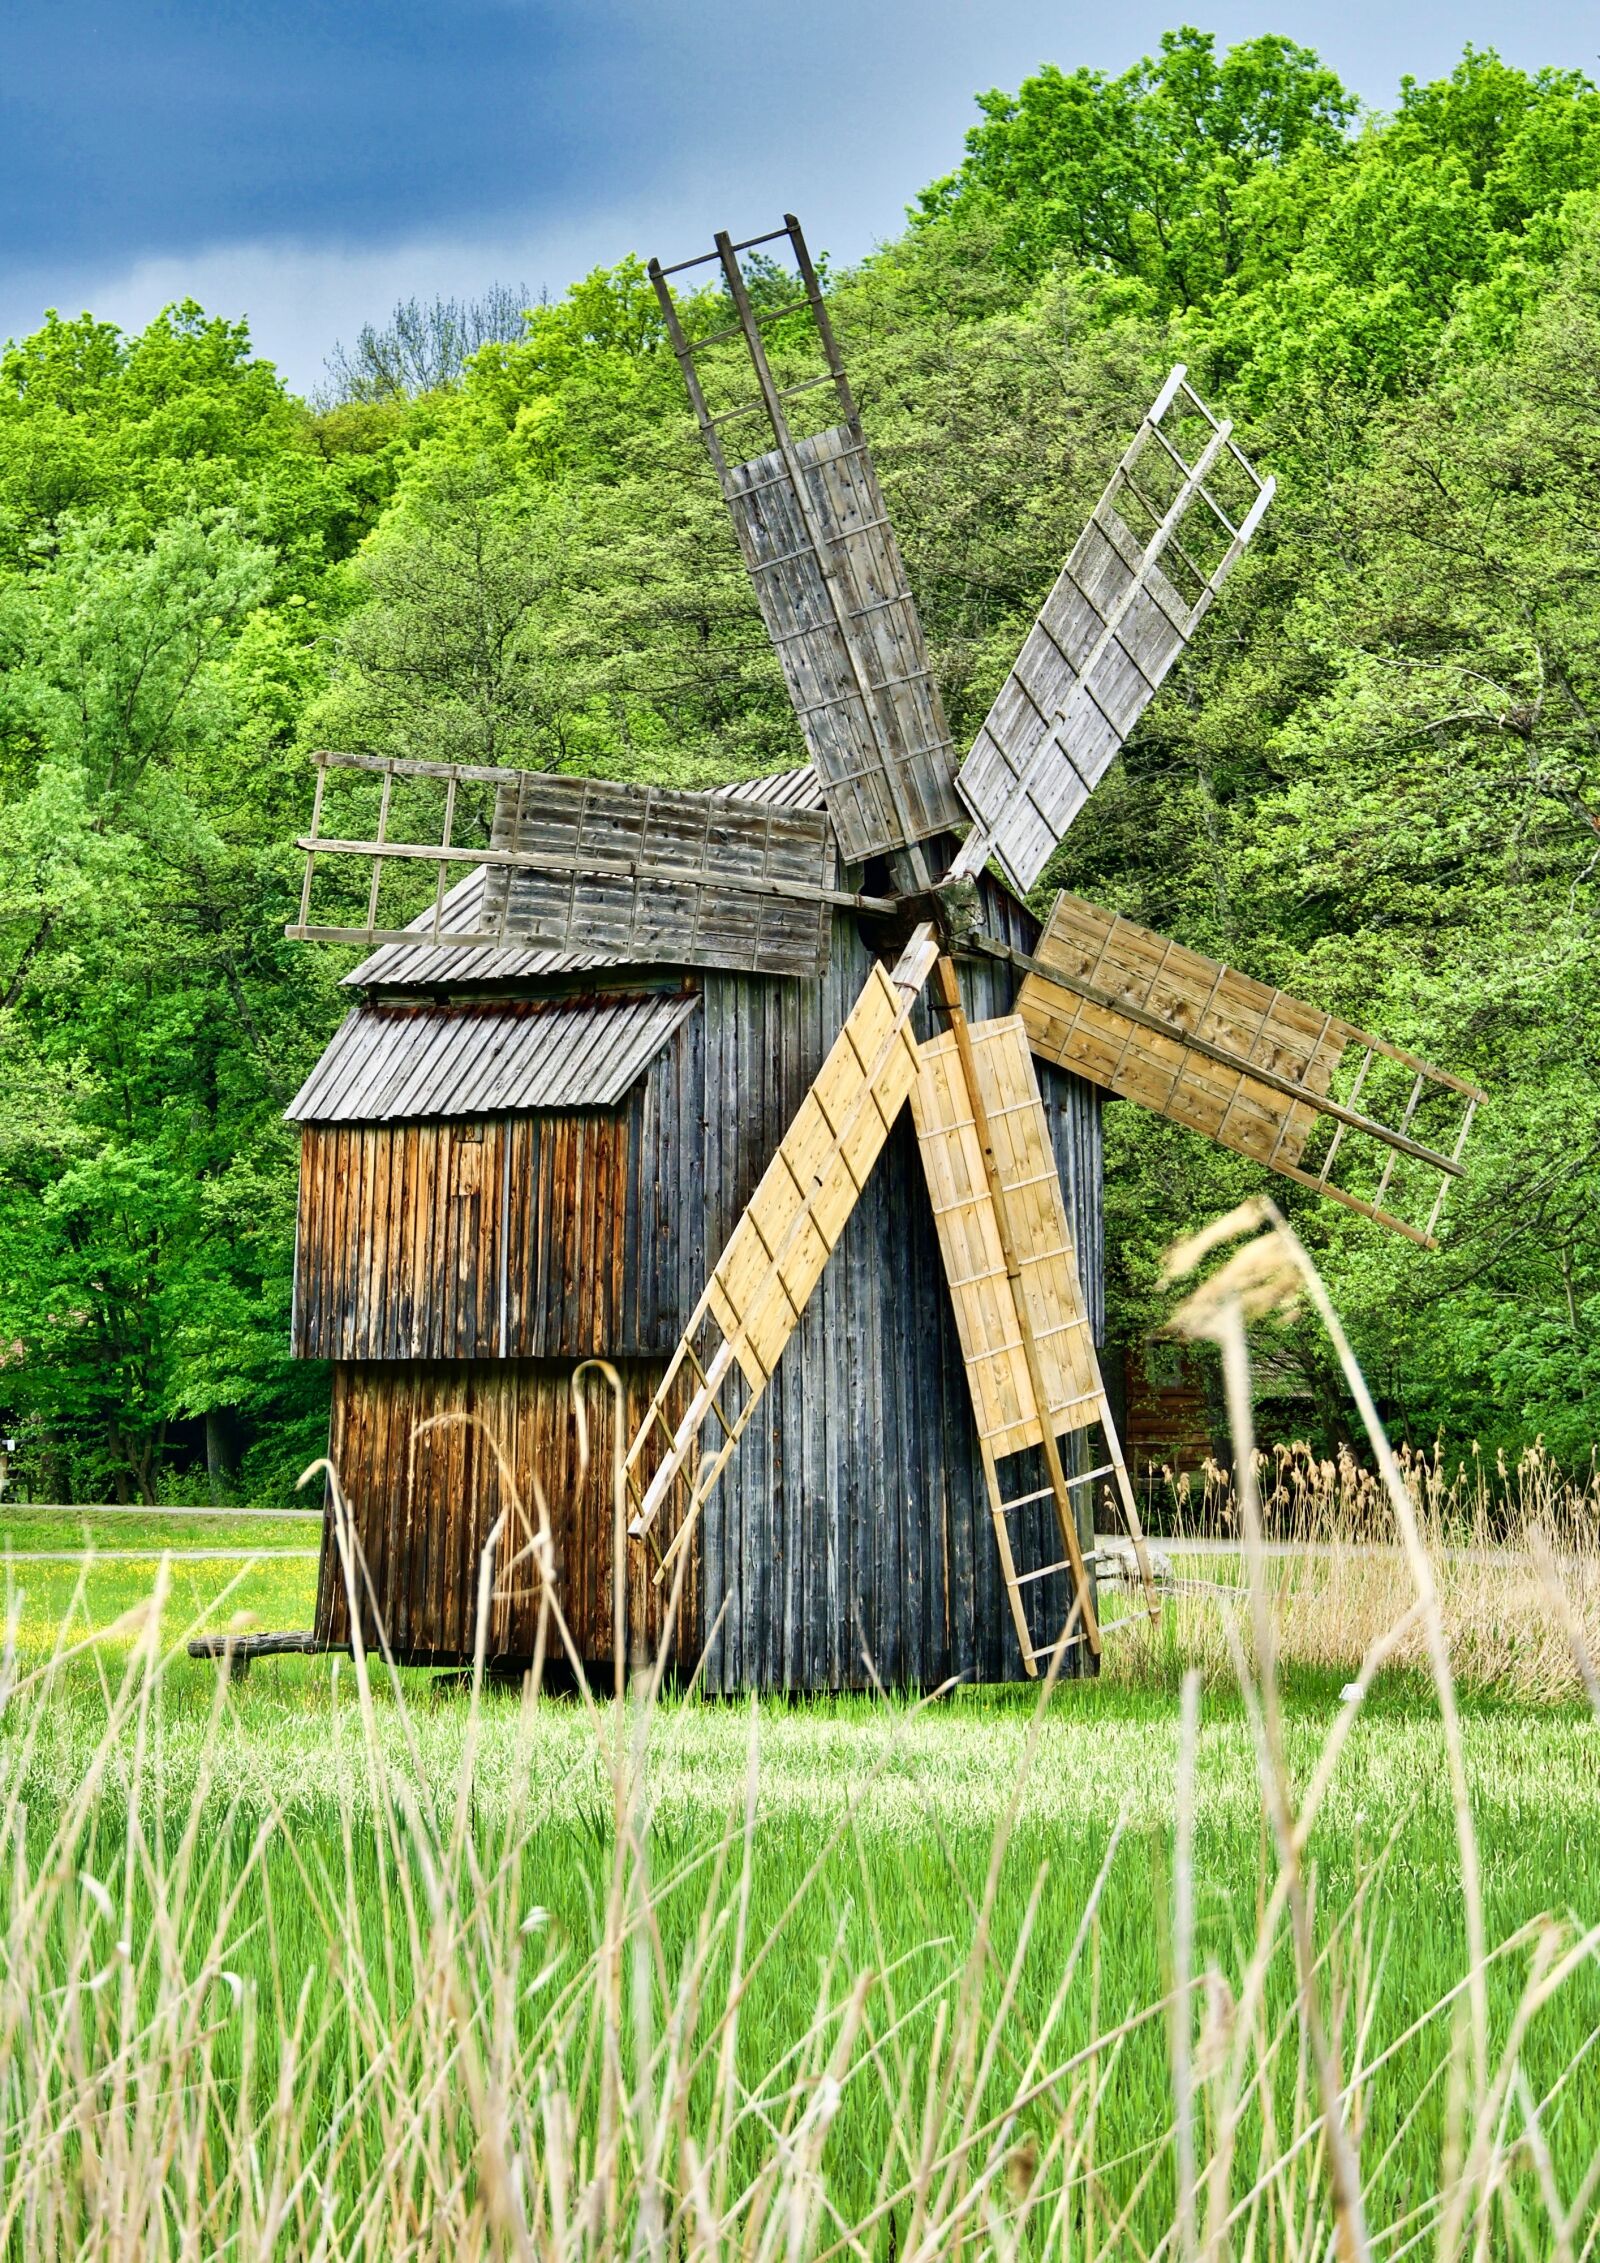 Sony a6500 sample photo. Windmill, wooden, agriculture photography